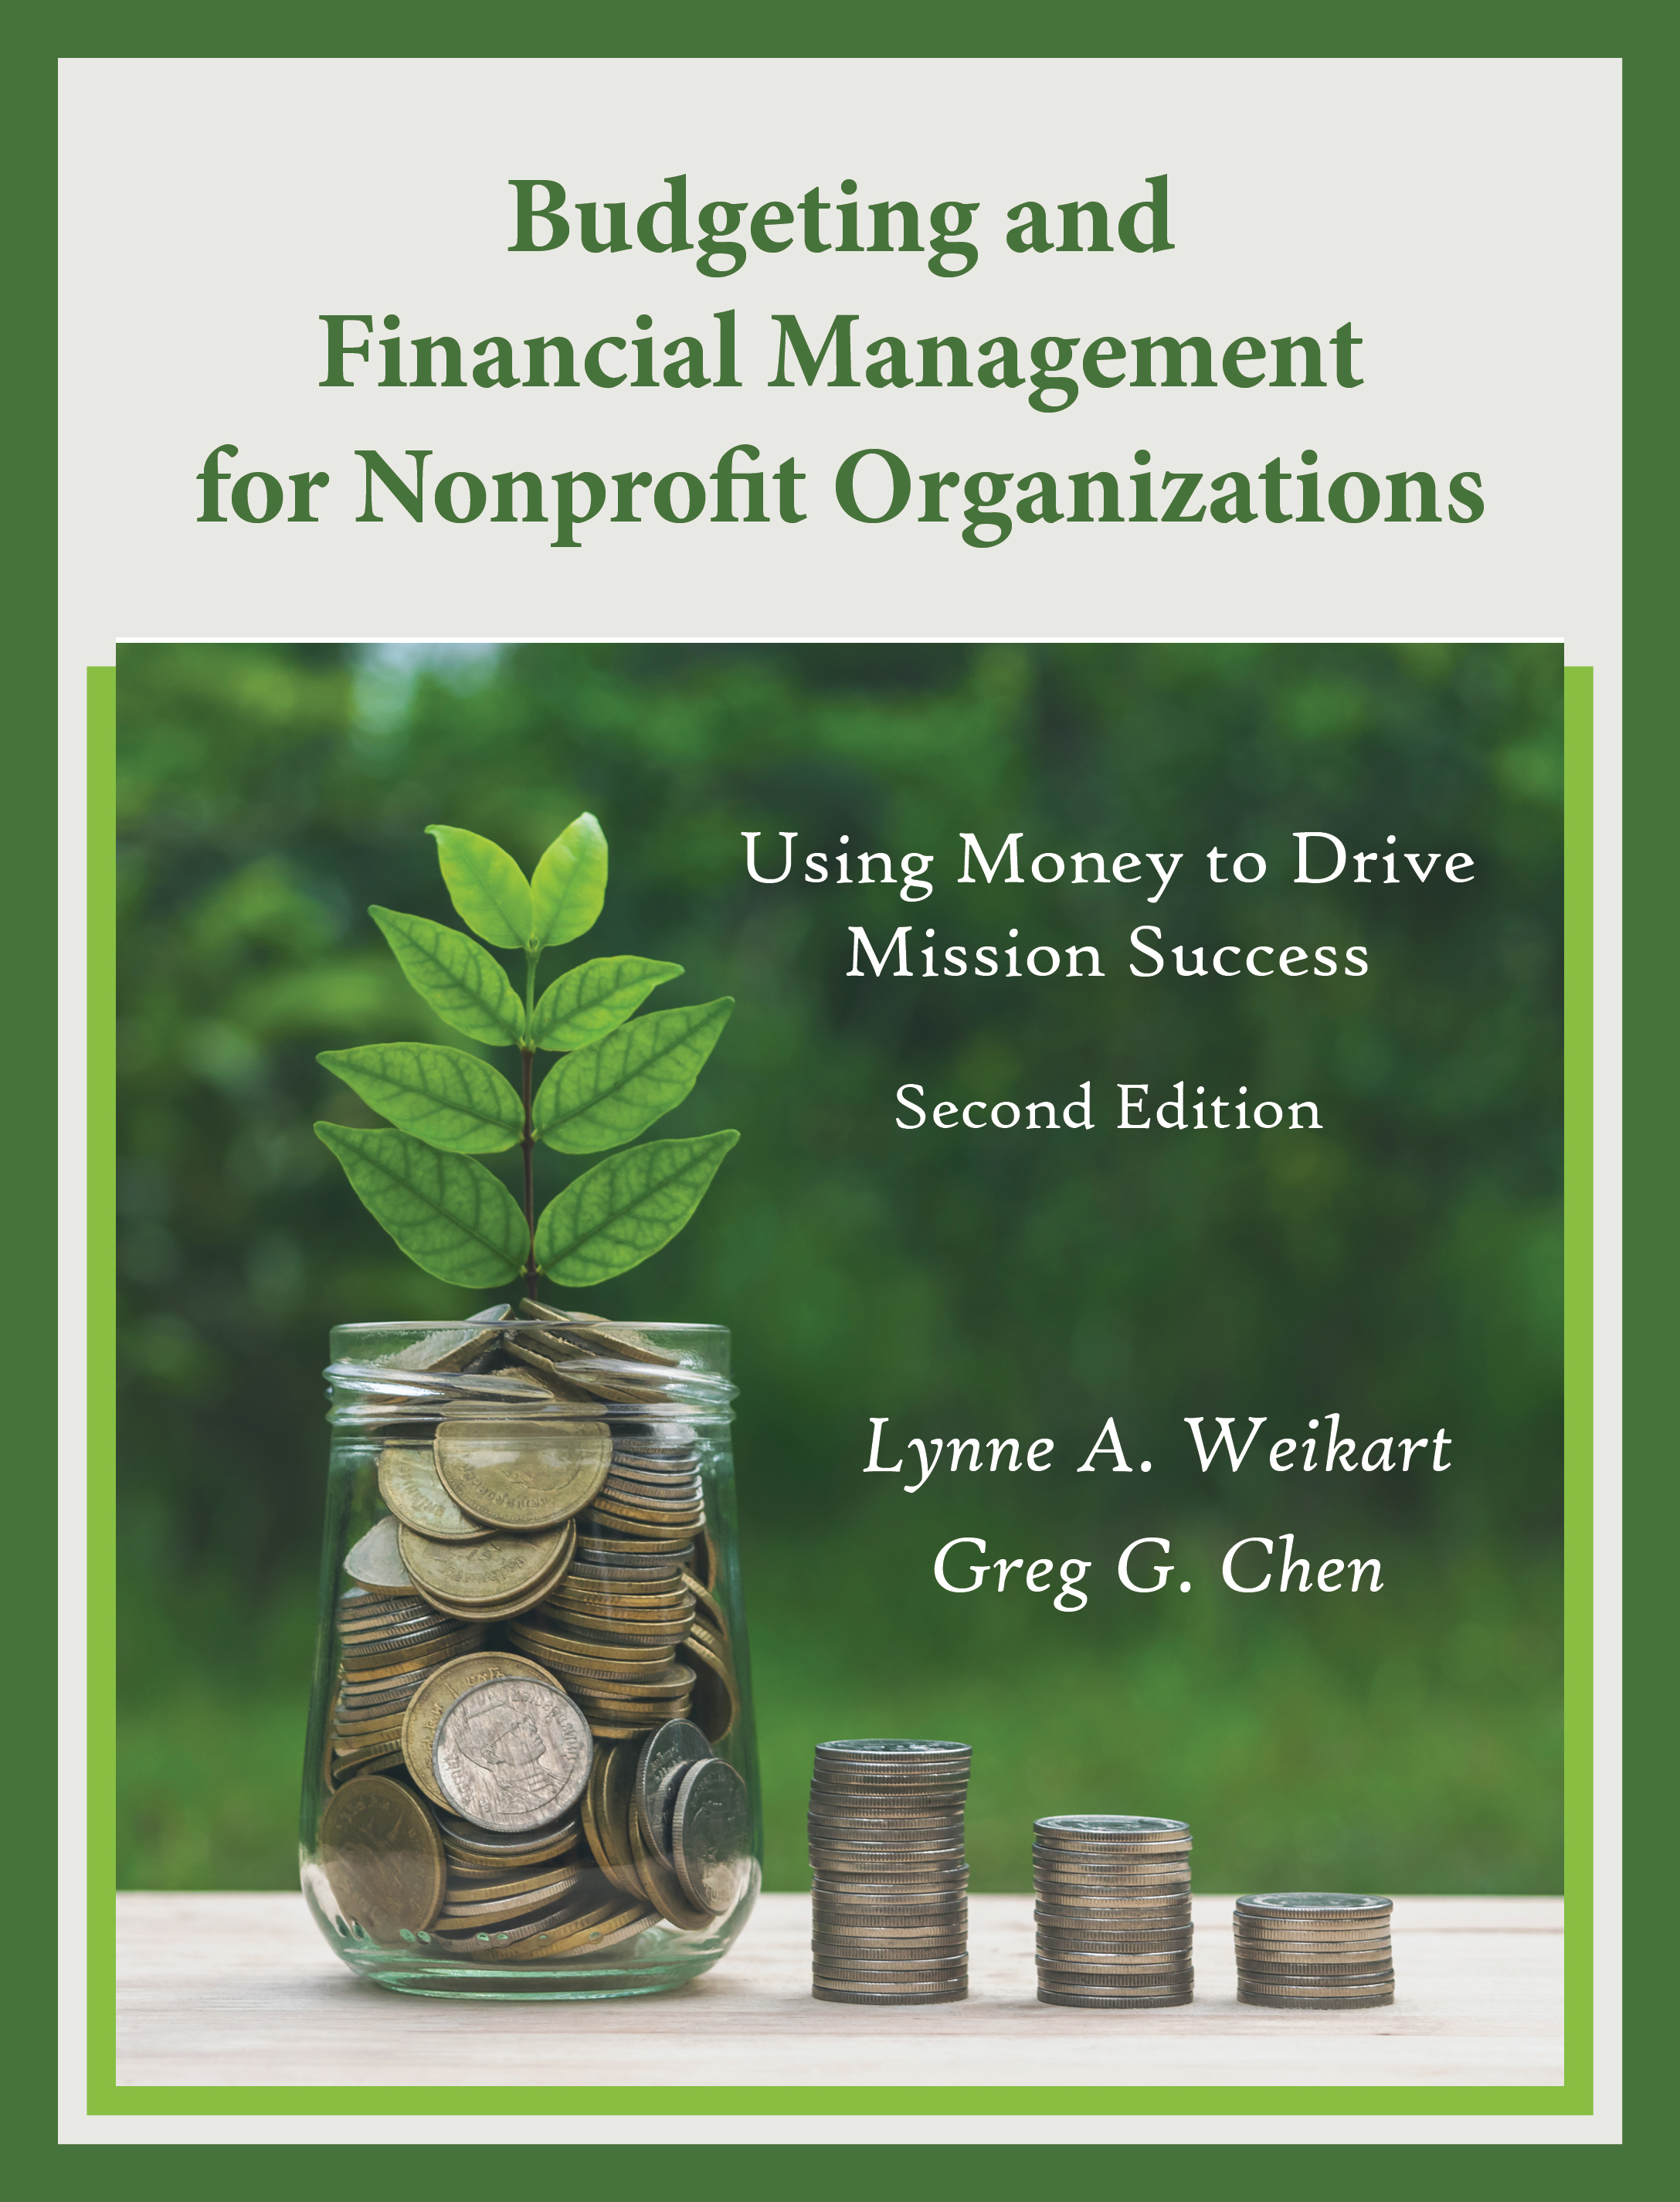 Budgeting and Financial Management for Nonprofit Organizations: Using Money to Drive Mission Success by Lynne A. Weikart, Greg G. Chen